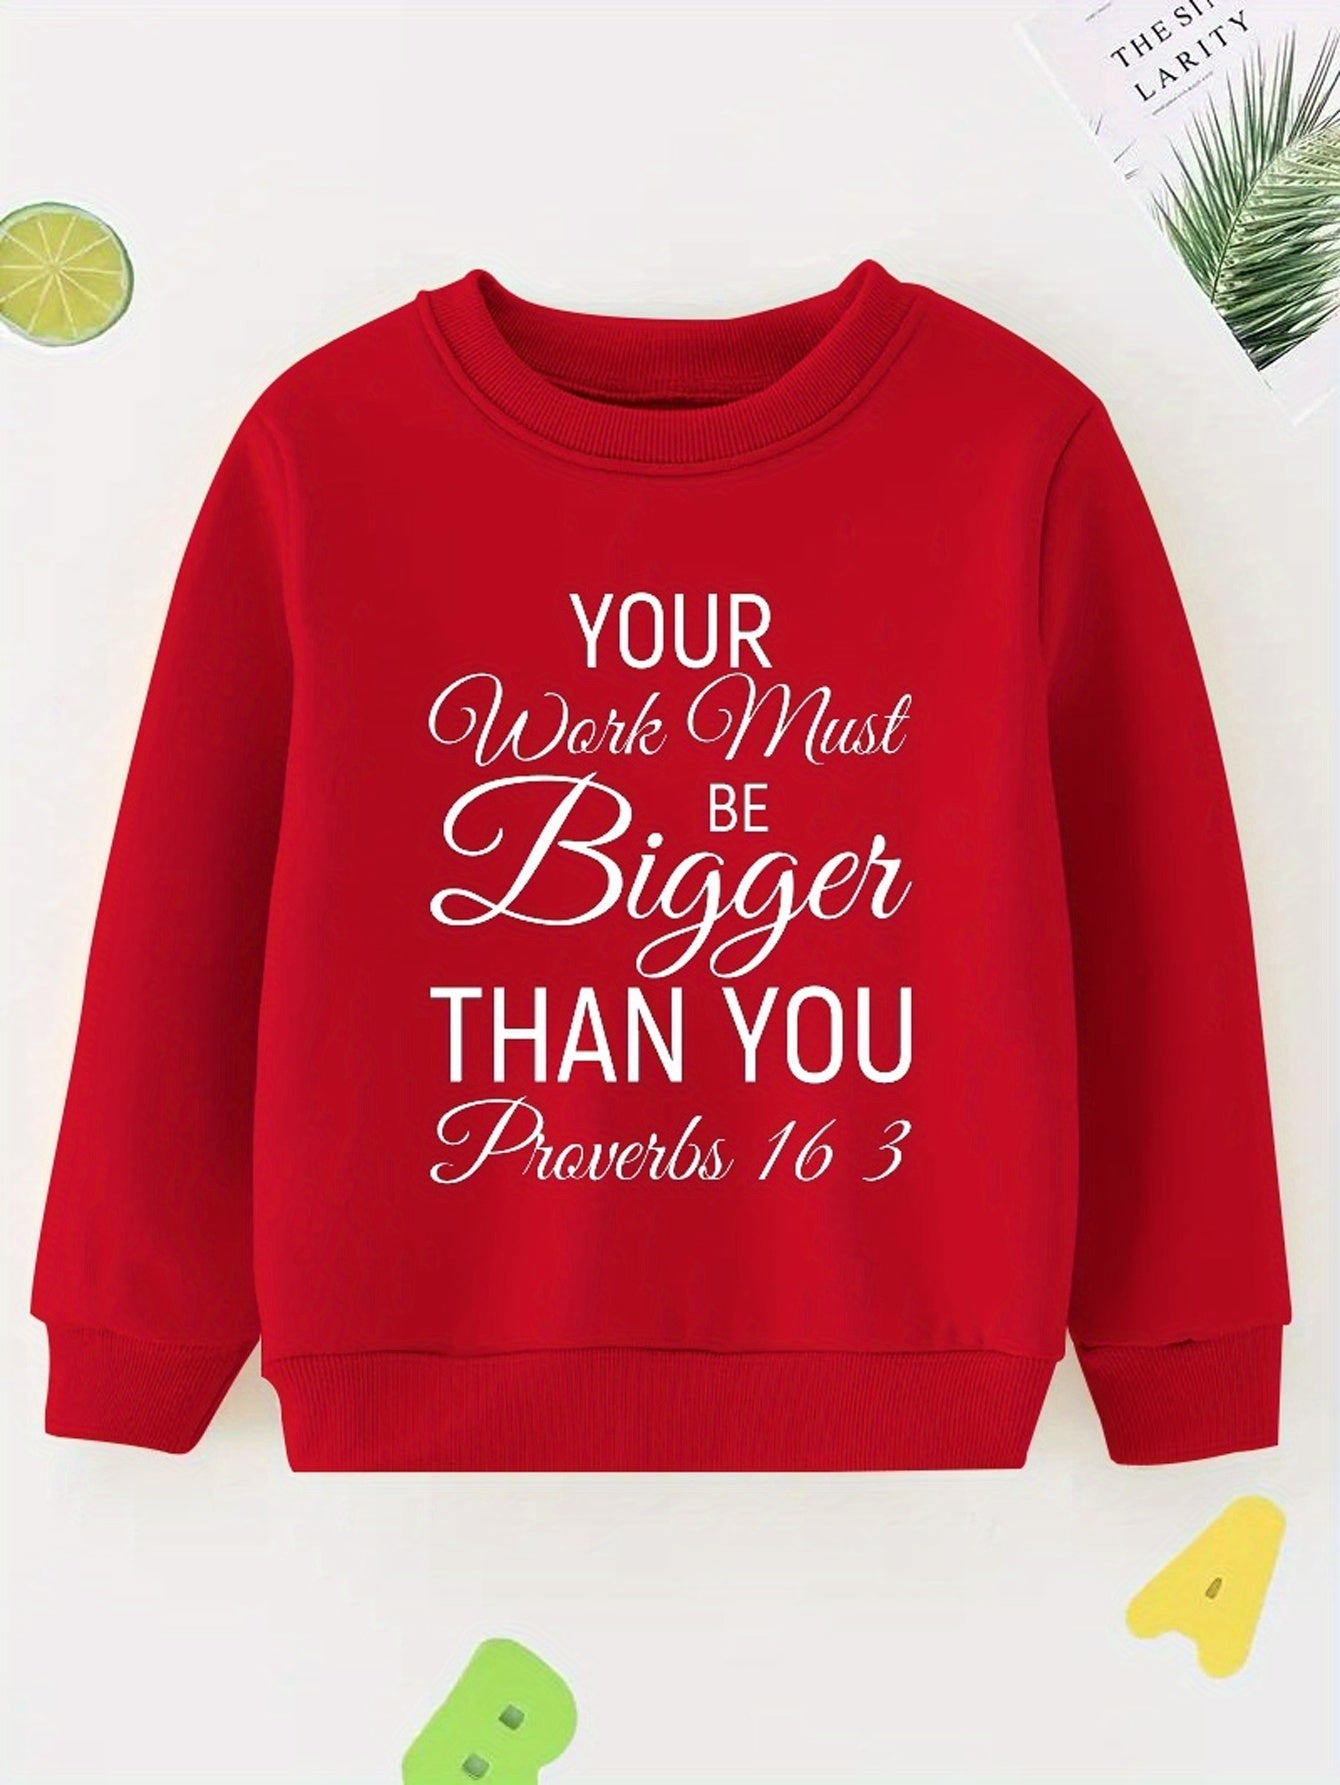 Proverbs 16:3 YOUR WORK MUST BE BIGGER THAN YOU Youth Christian Pullover Sweatshirt claimedbygoddesigns